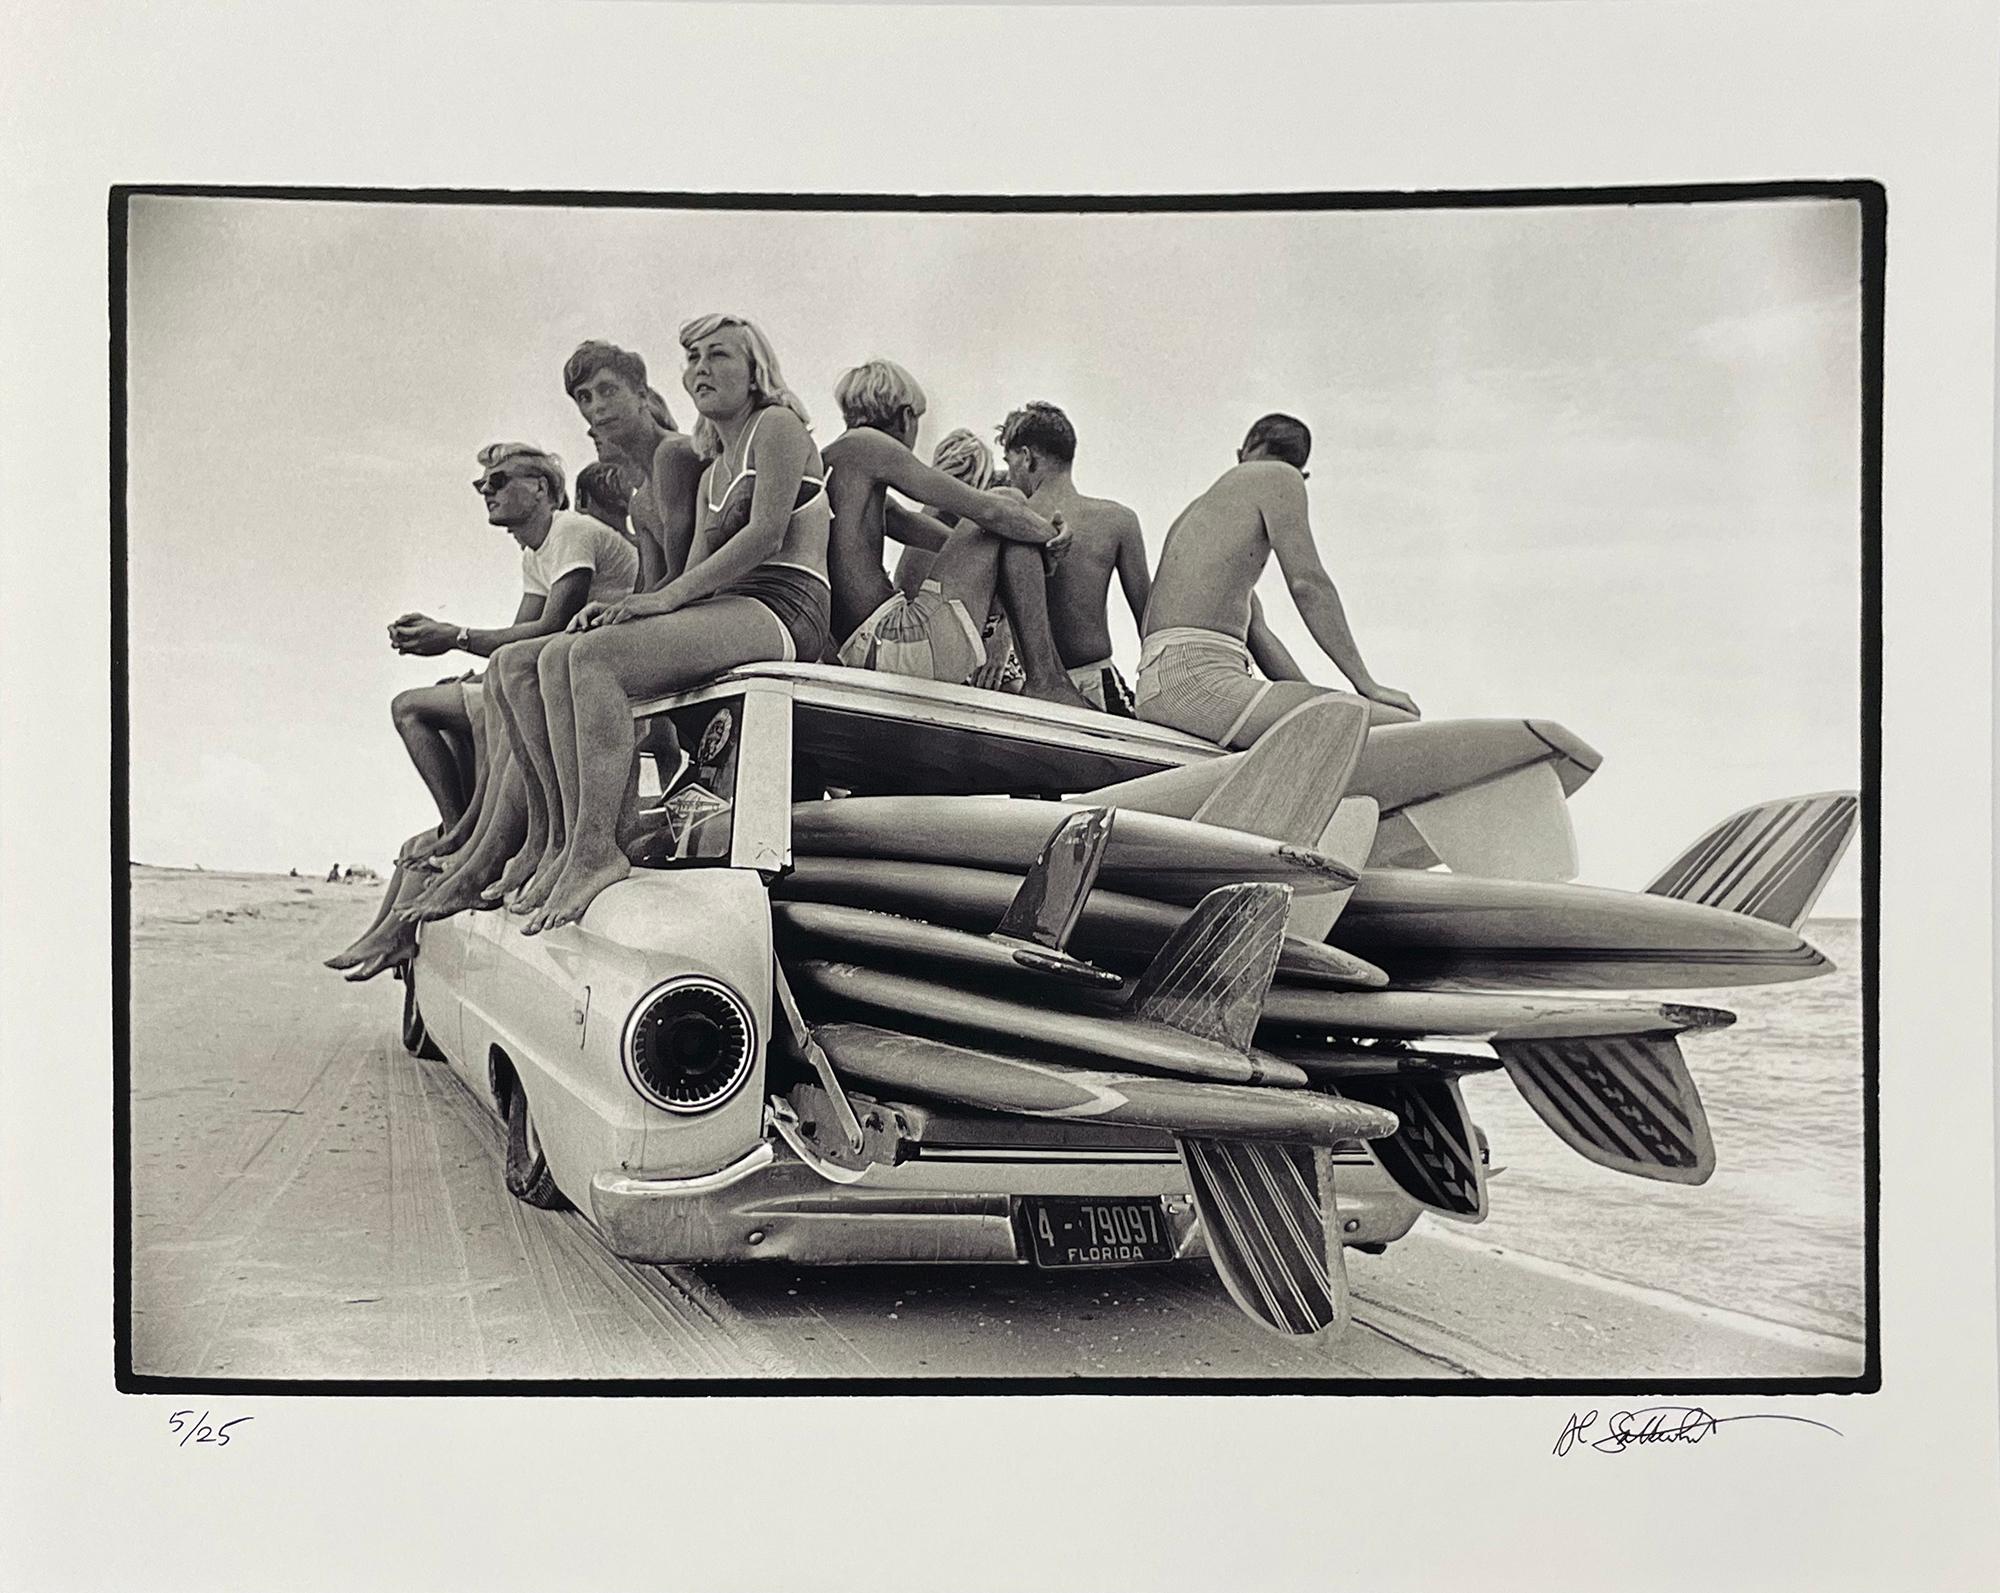 Surf Wagon, St. Petersburg Beach by Al Satterwhite is a 16 x 20 inch archival pigment print, available in an edition of 25. This photograph features a group of teenagers sitting on top of a car filled with surfboards. The image size is 12 x 17 3/4